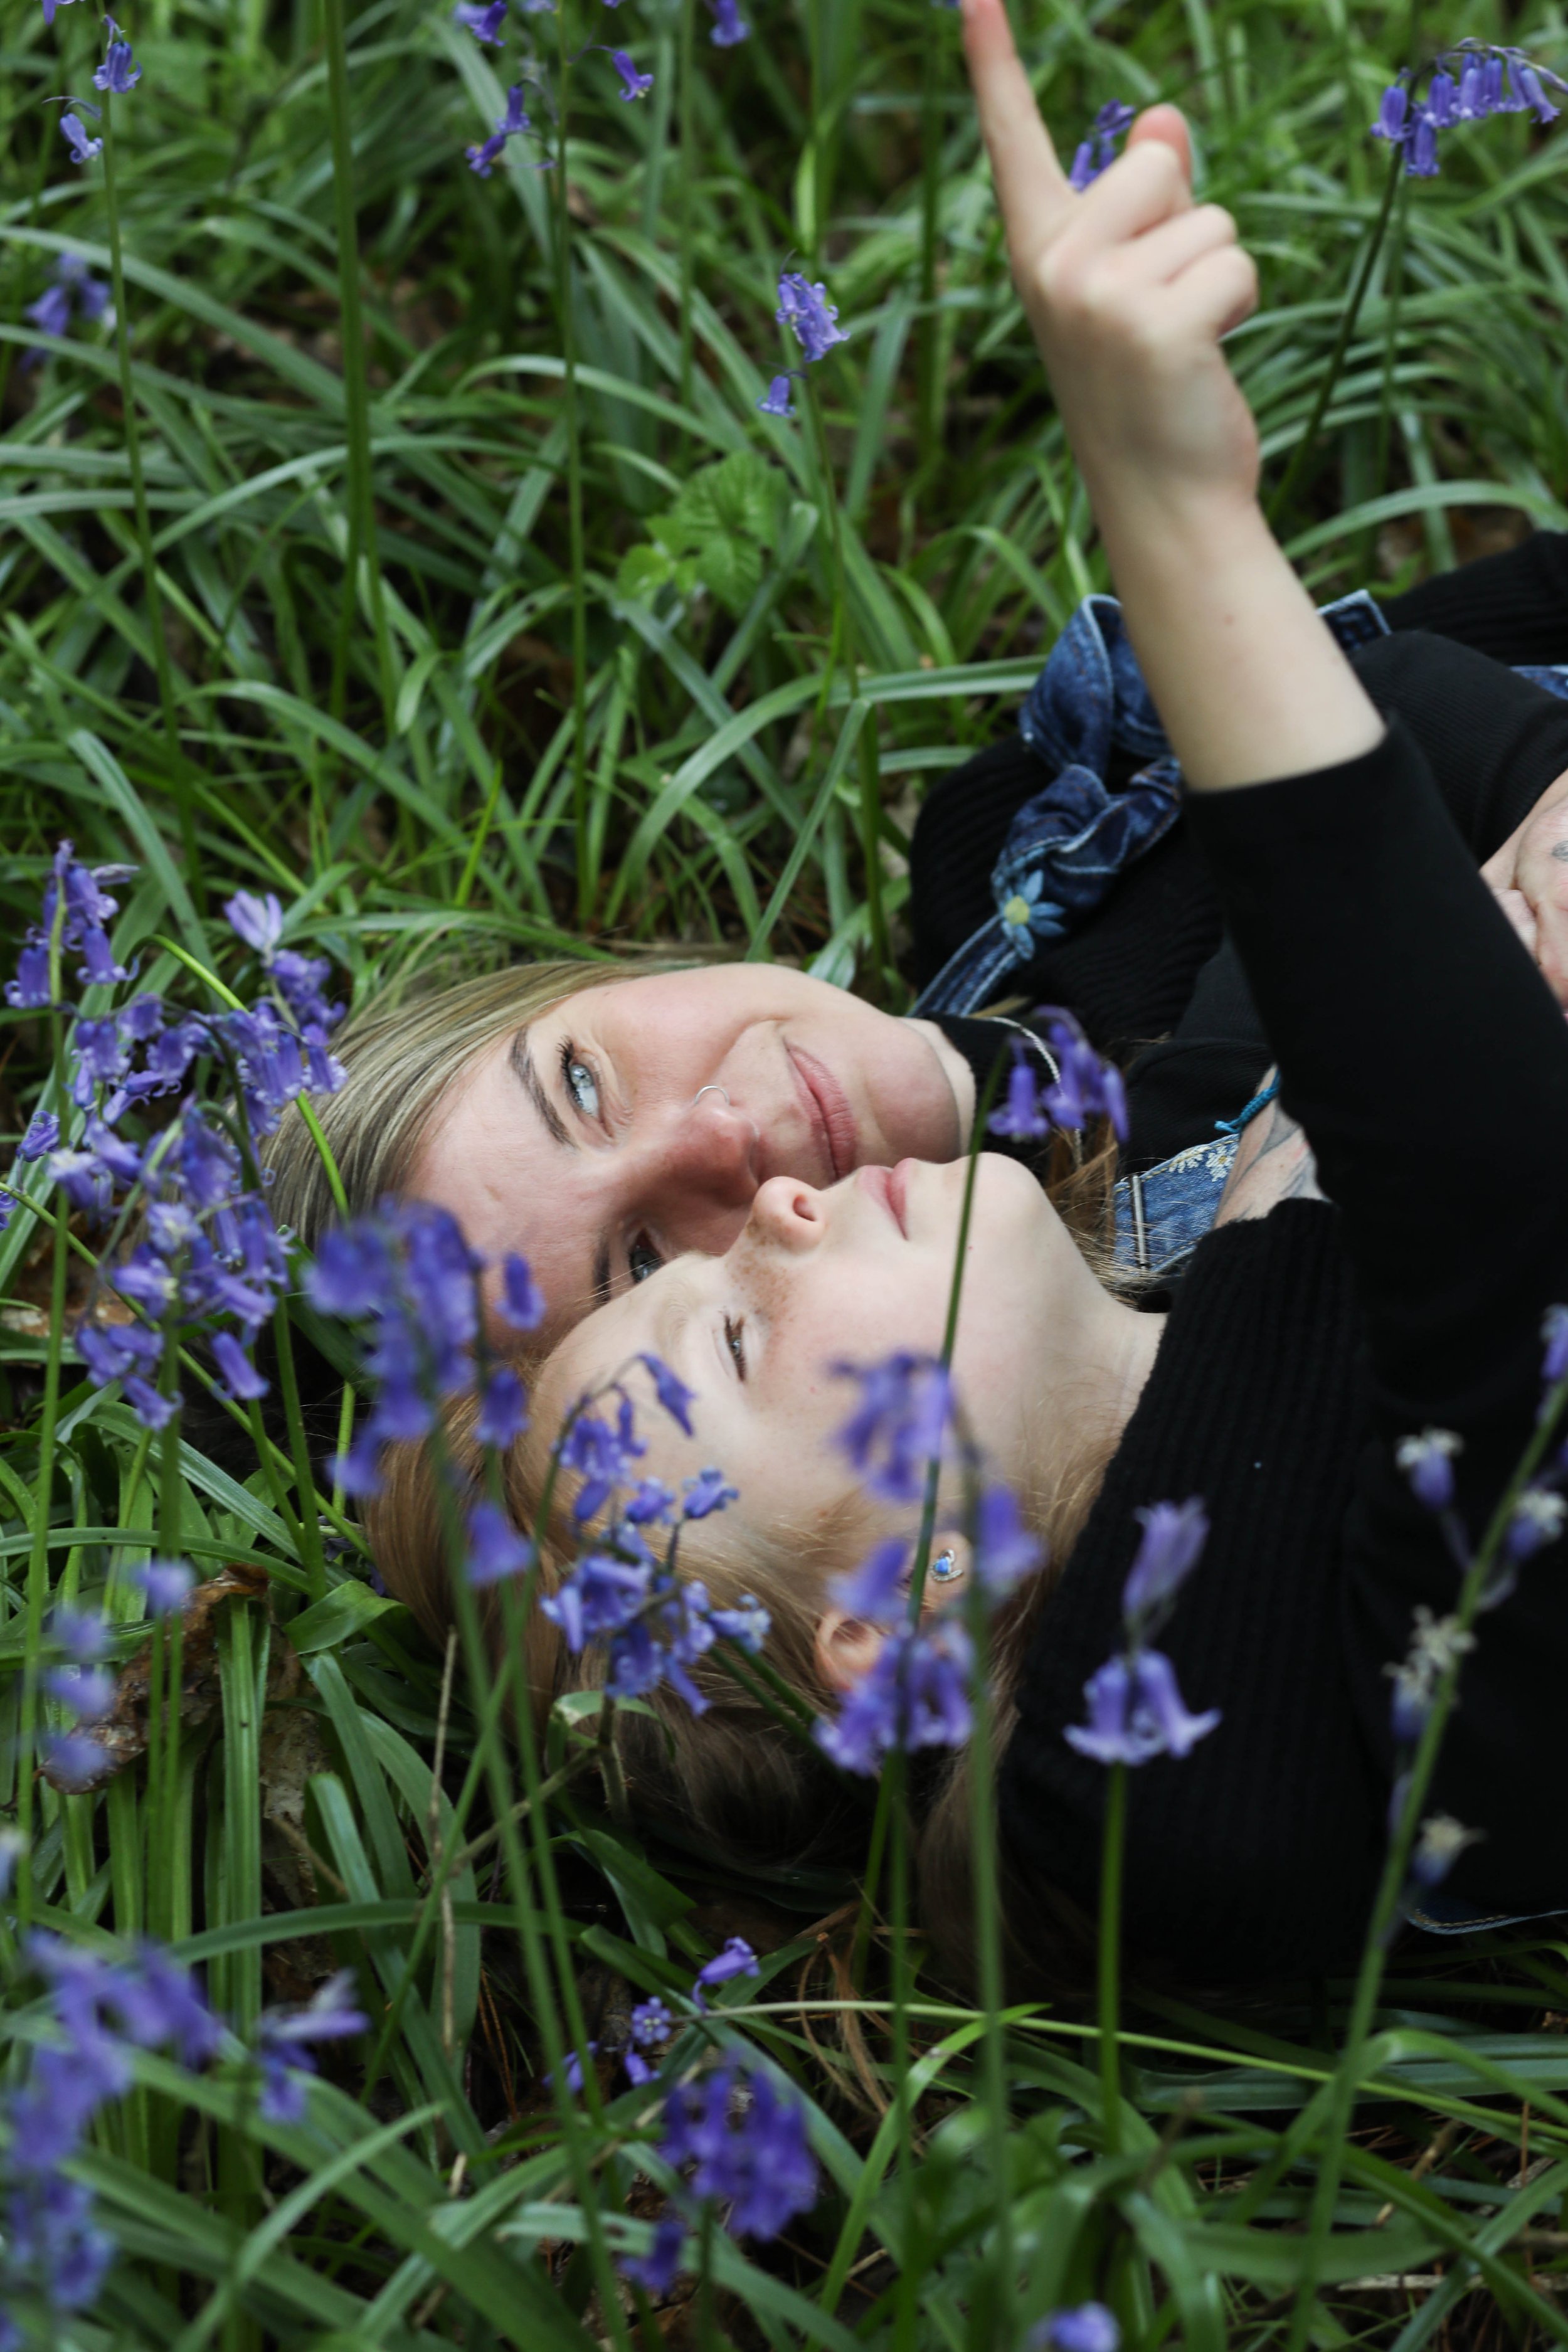 MUM AND DAUGHTER PHOTO SHOOT IN THE BLUEBELLS | BERKSHIRE PORTRAIT SHOOTS51 choice .JPG